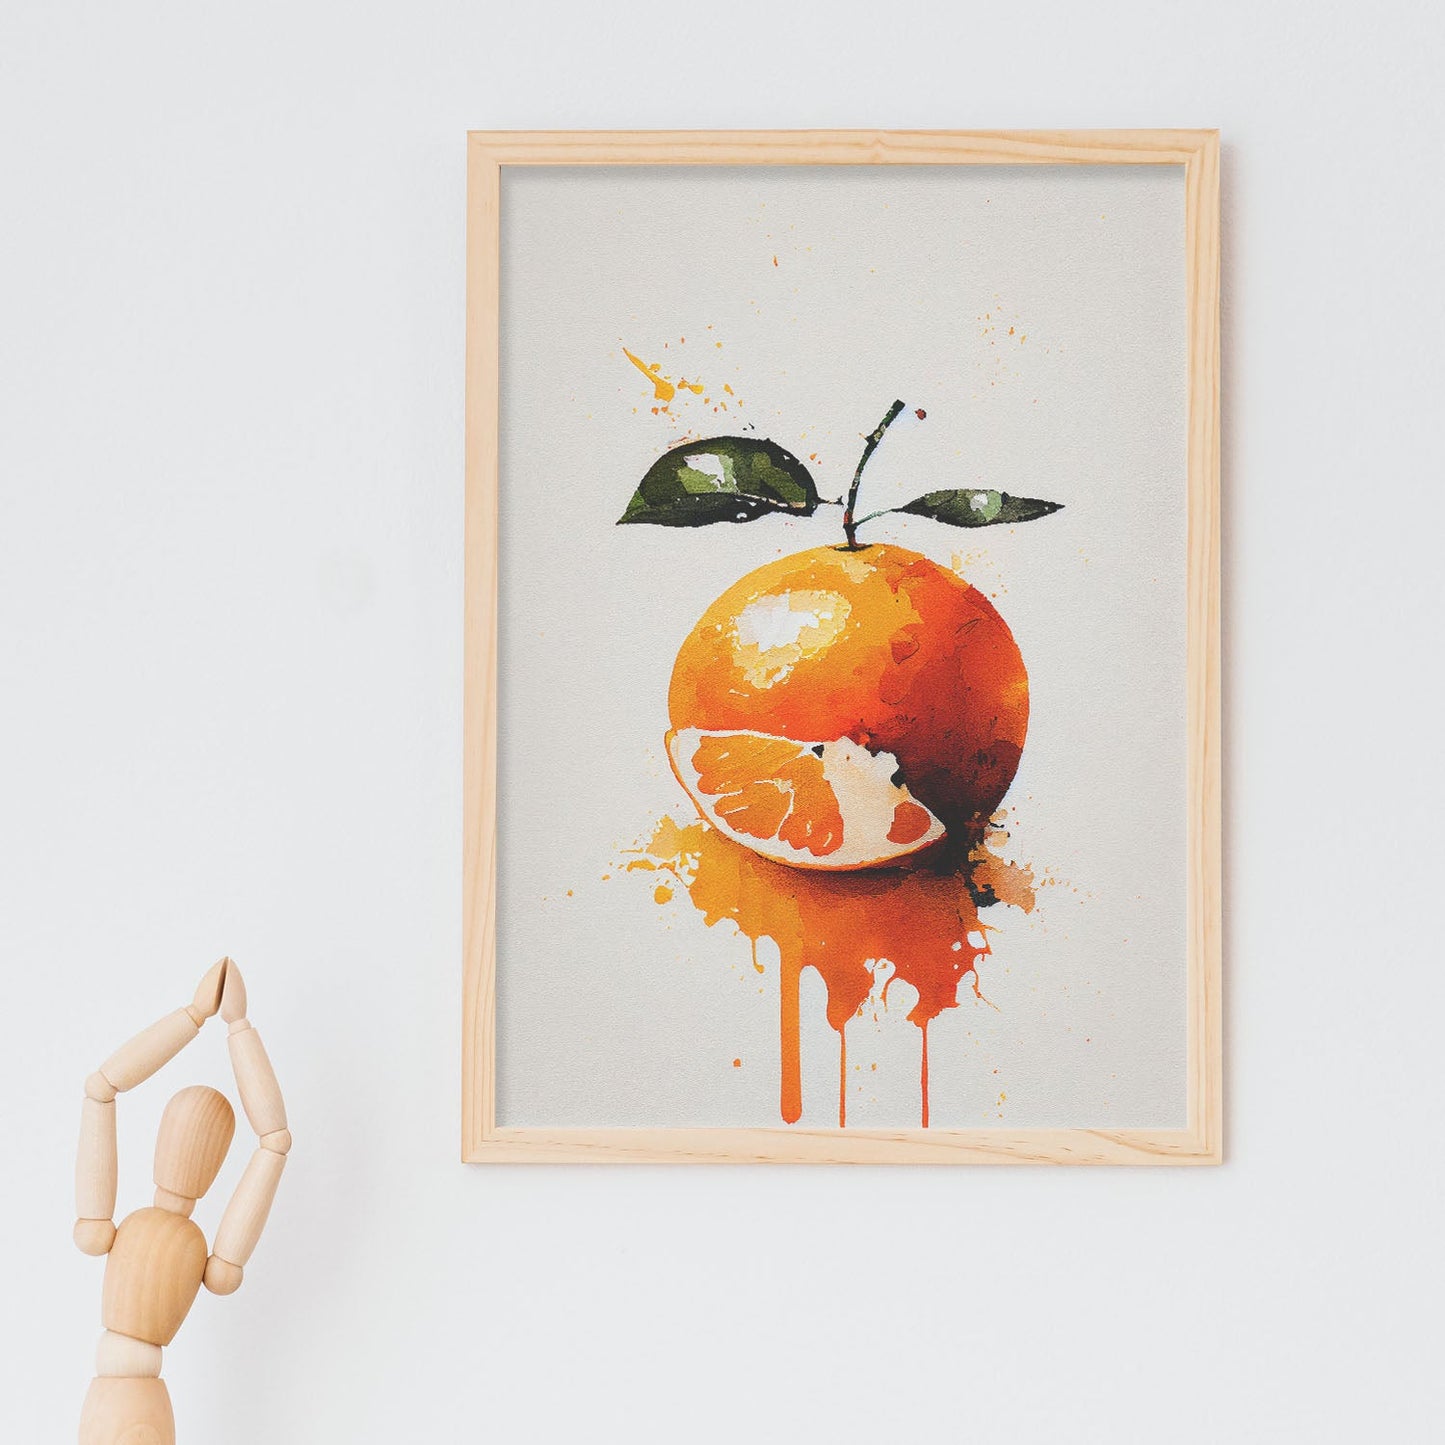 Nacnic minimalist Clementine. Aesthetic Wall Art Prints for Bedroom or Living Room Design.